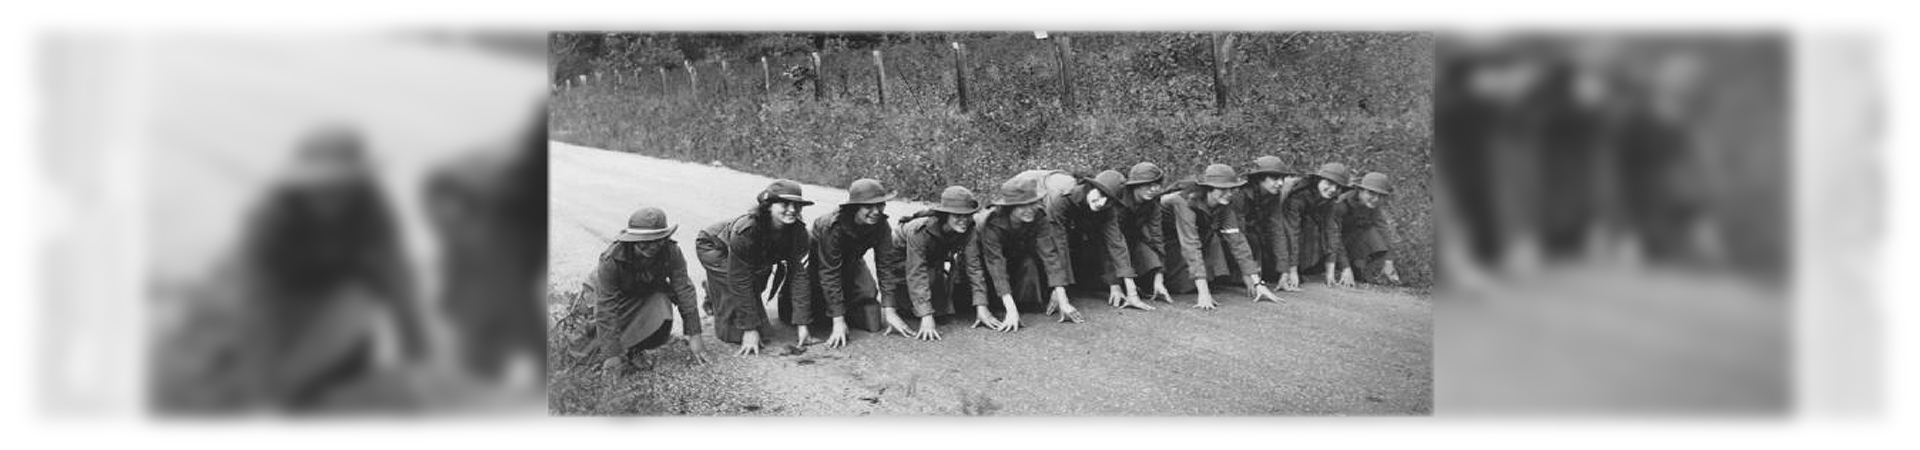  historic photo of girls scouts about to run a race 